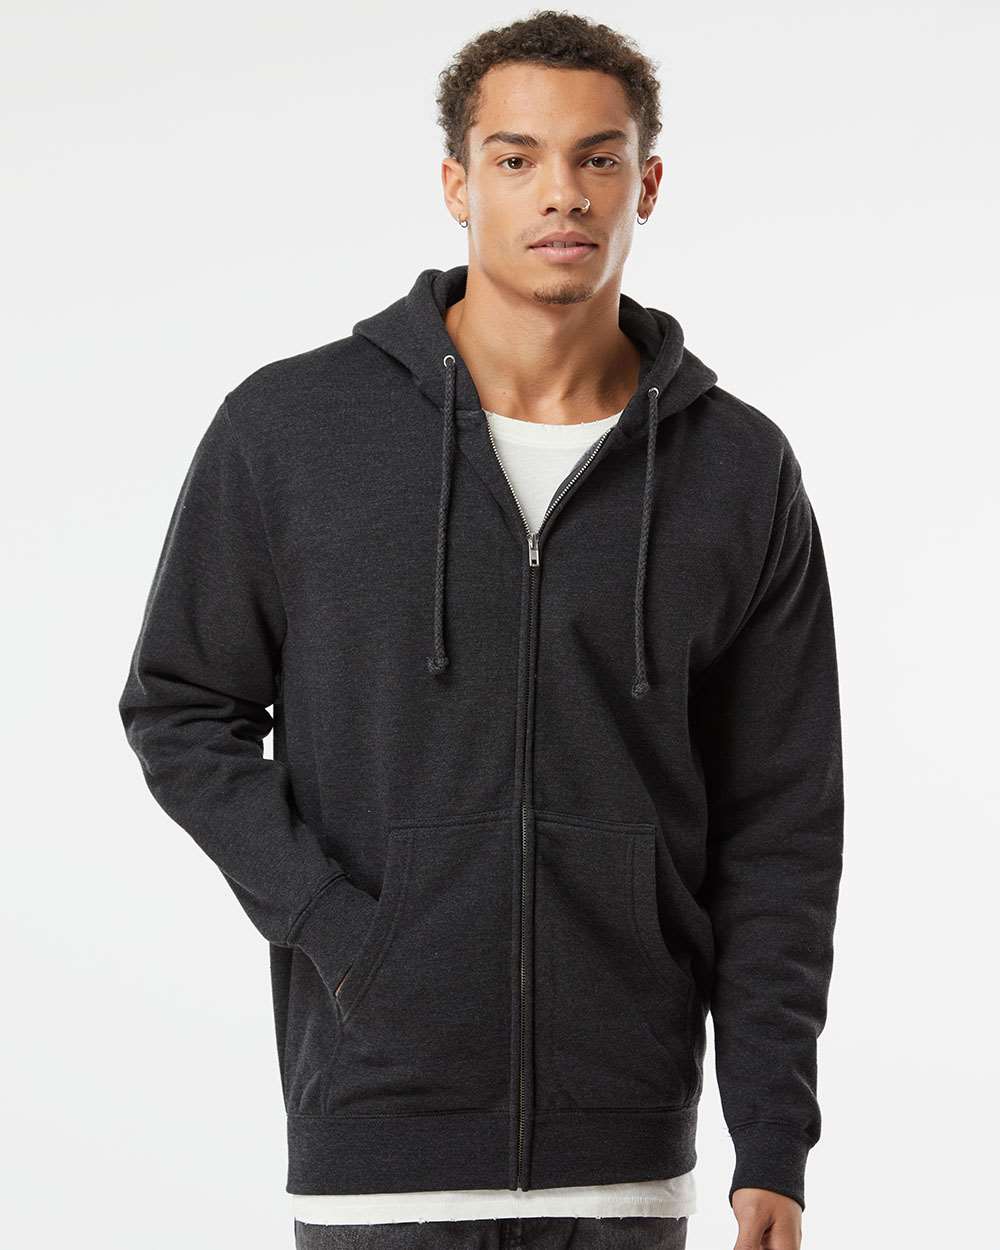 HEAVYWEIGHT - Independent Trading Co. -  Full-Zip Hooded Sweatshirt - IND4000Z